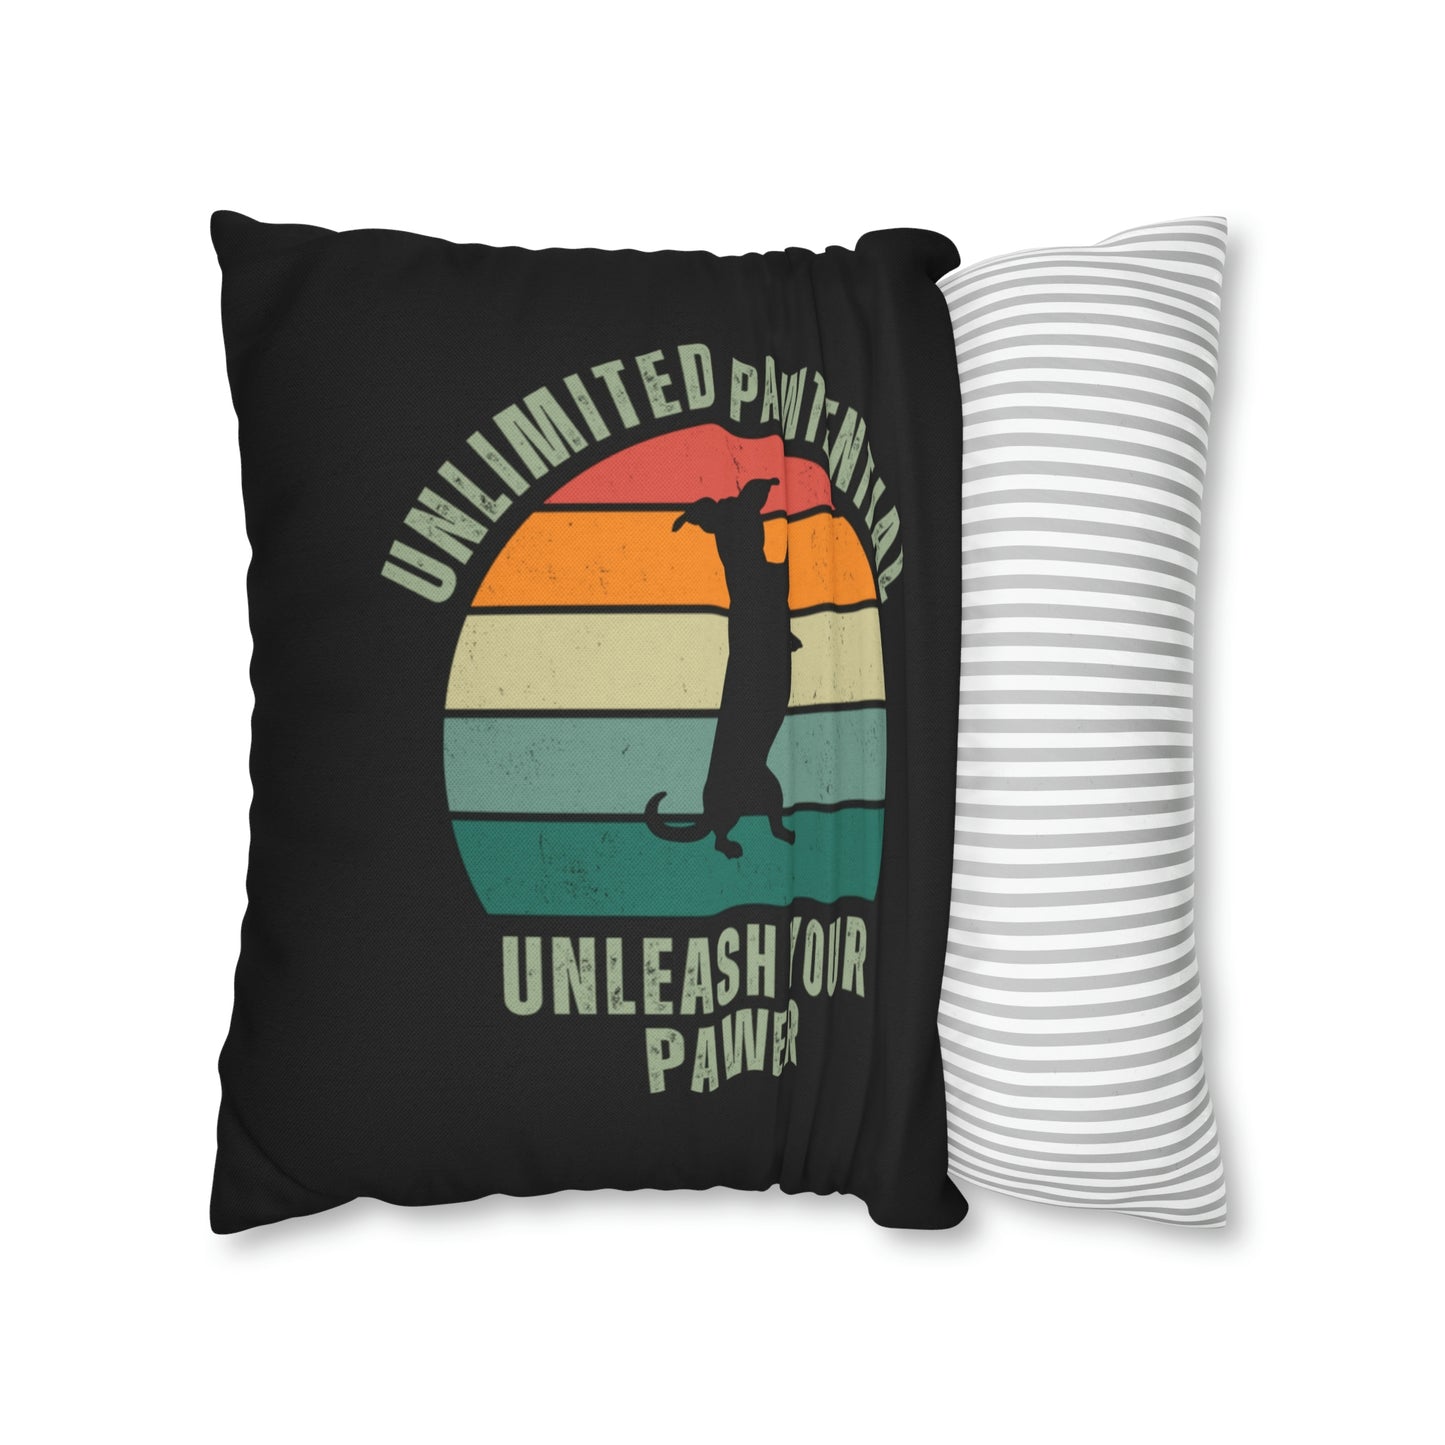 Unlimited Pawtential. Unleash Your Pawer. Spun Polyester Square Pillow Case